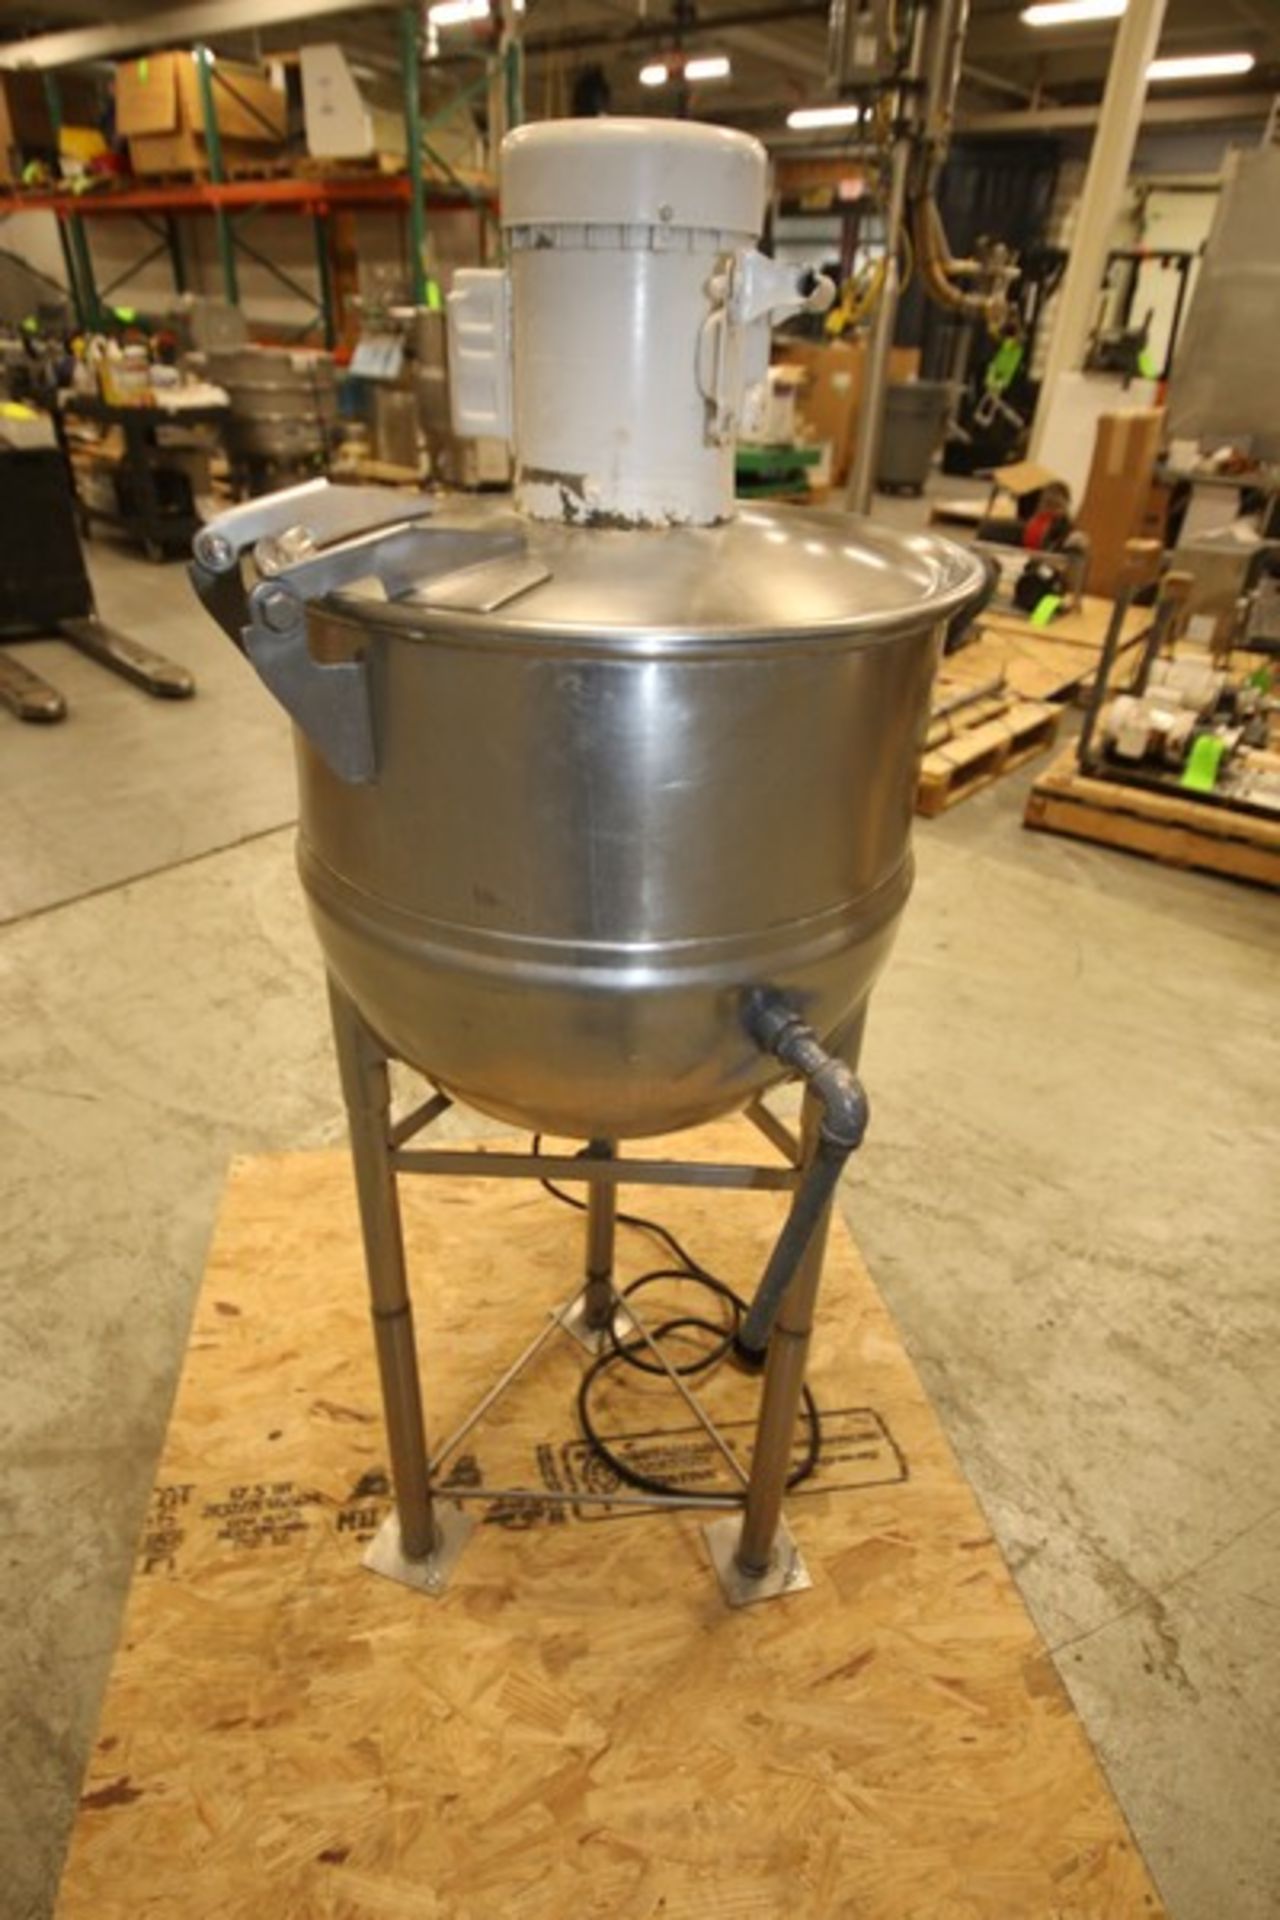 Groen 20 Gallon Jacket S/S Kettle, Model FT 20 SP, SN 31923 N, with 1/2 hp / 1725 rpm Top Mounted - Image 5 of 9